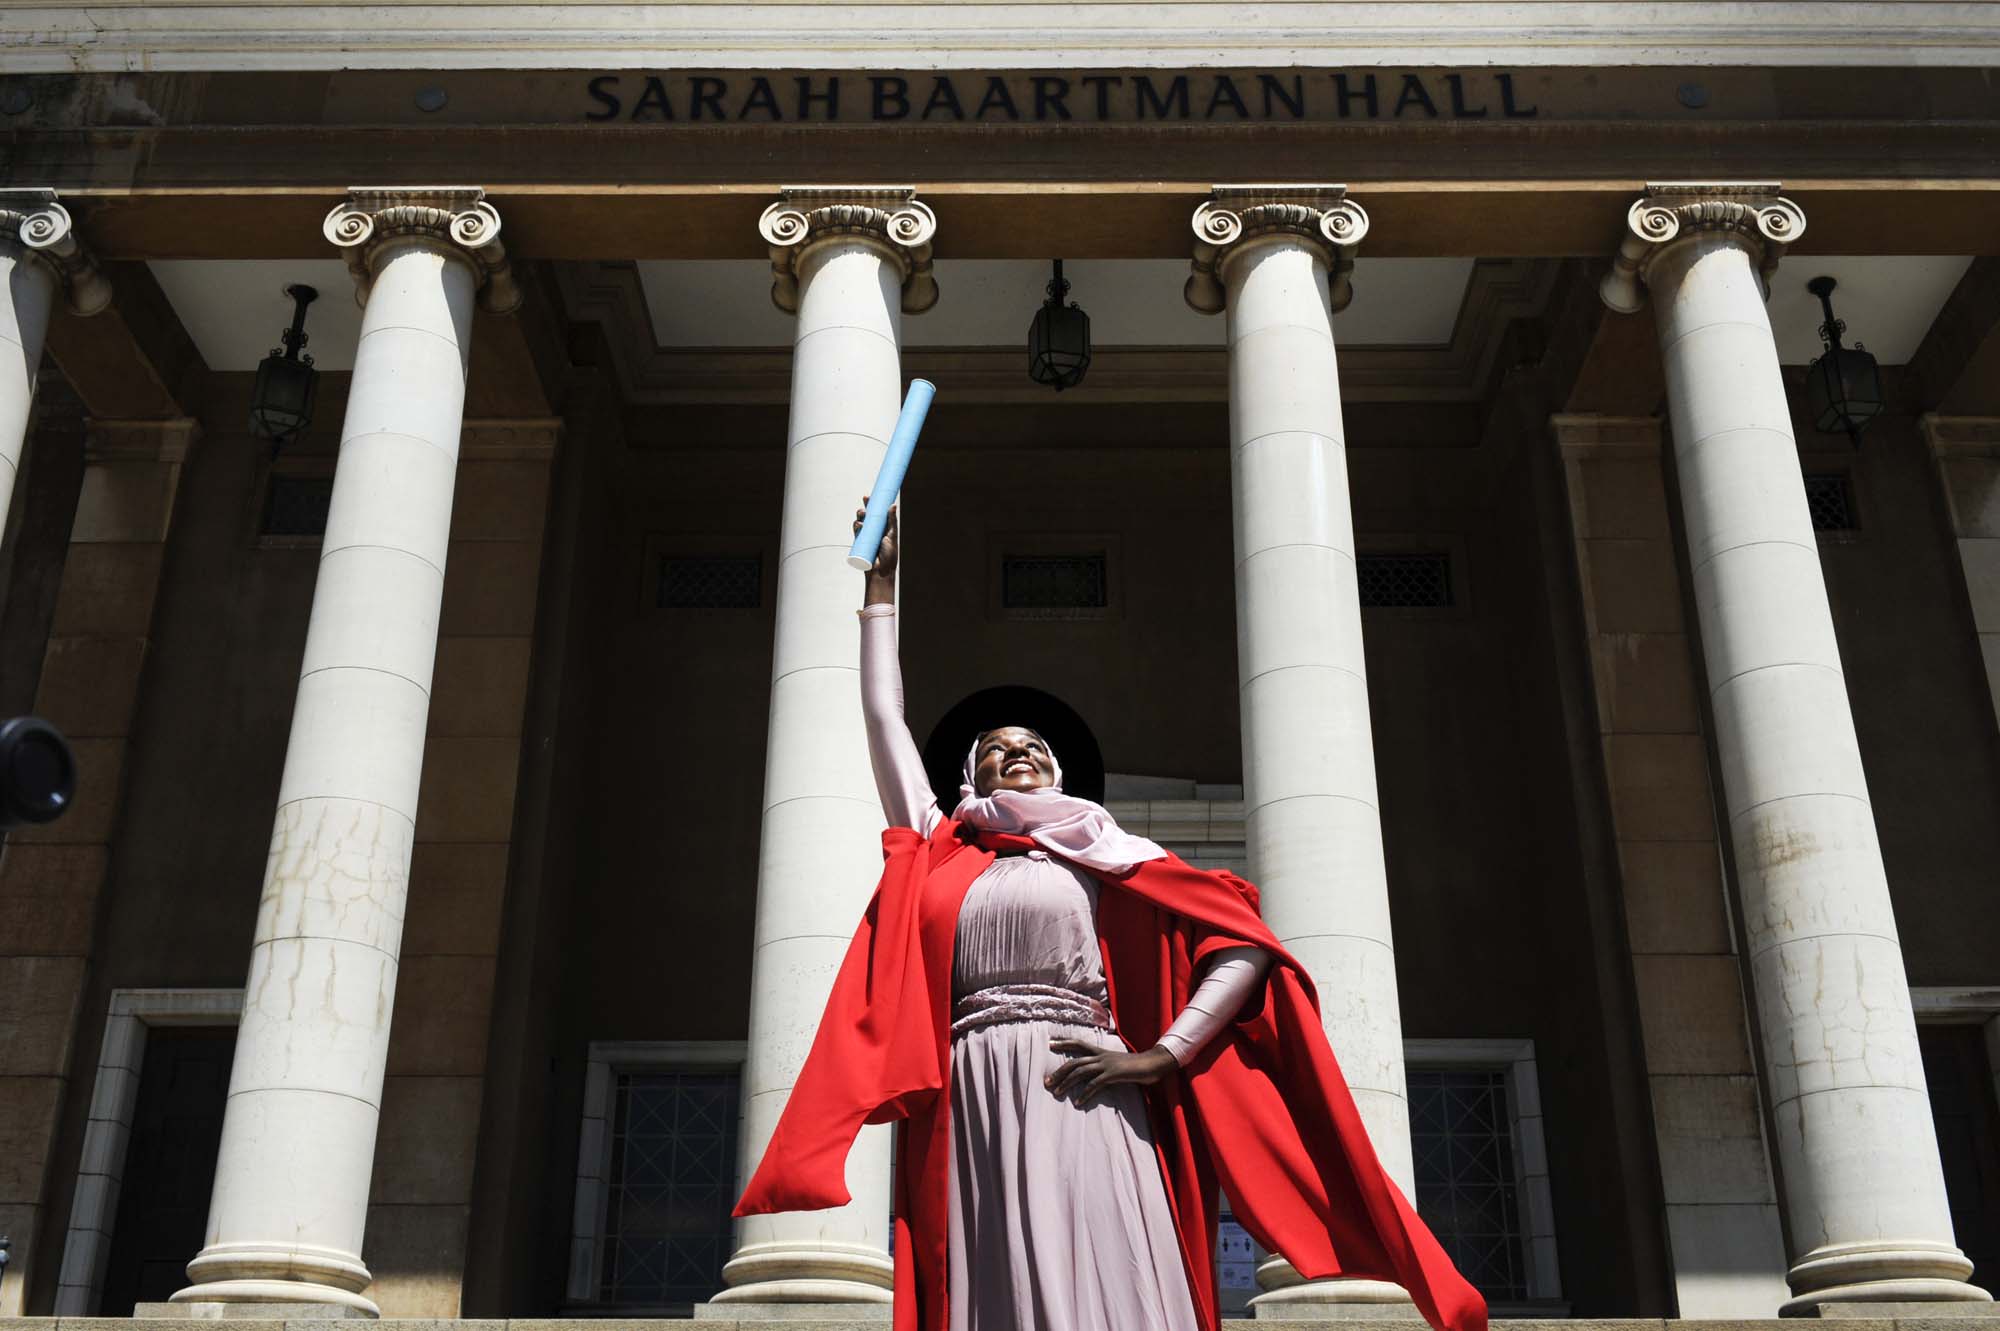 The December 2020 graduation season was celebrated online in virtual graduation celebratory events, but VC Prof Mamokgethi Phakeng met with some of the graduates in person on the steps of Sarah Baartman Hall.